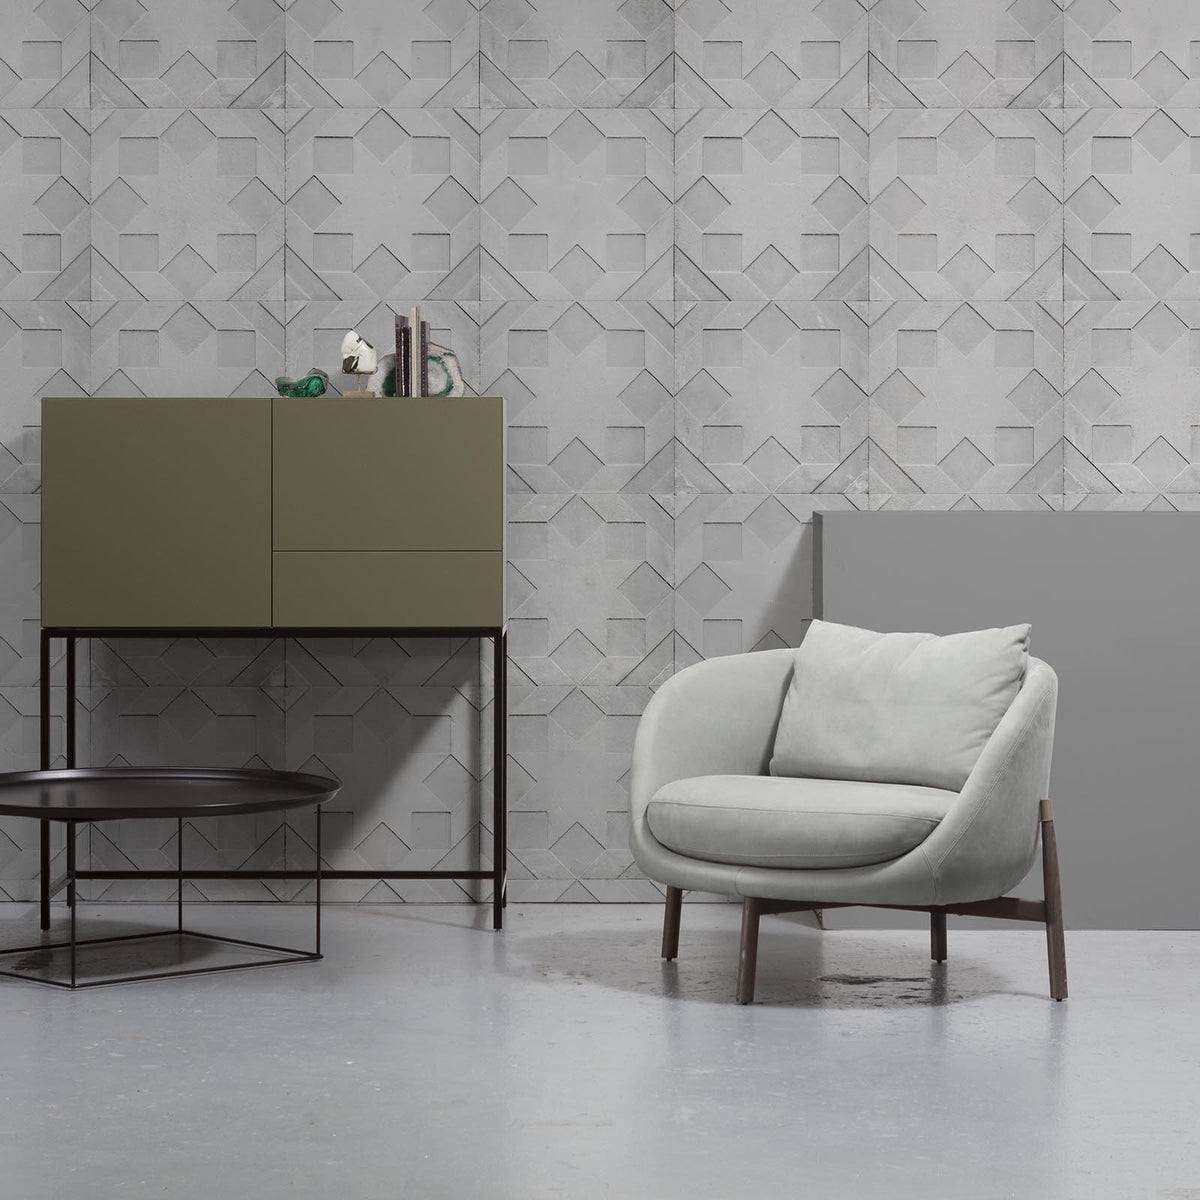 NDE-02 Star Moulded Concrete wallpaper by Nada Debs for NLXL